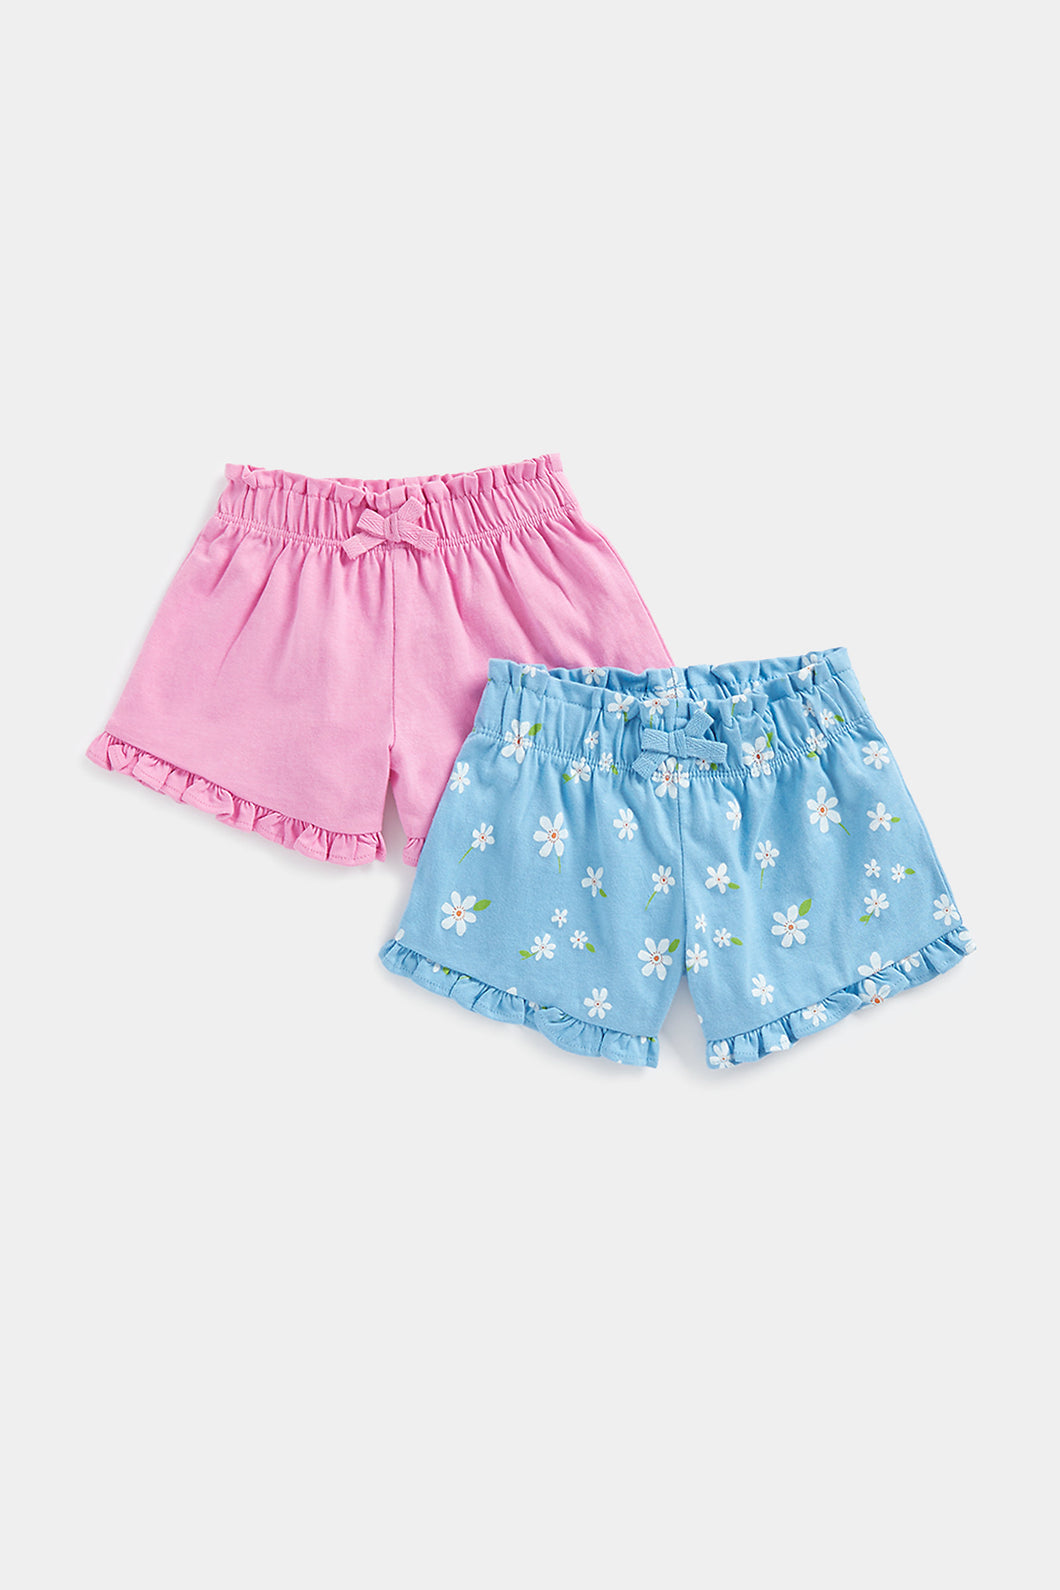 Floral and Pink Jersey Shorts - 2 Pack